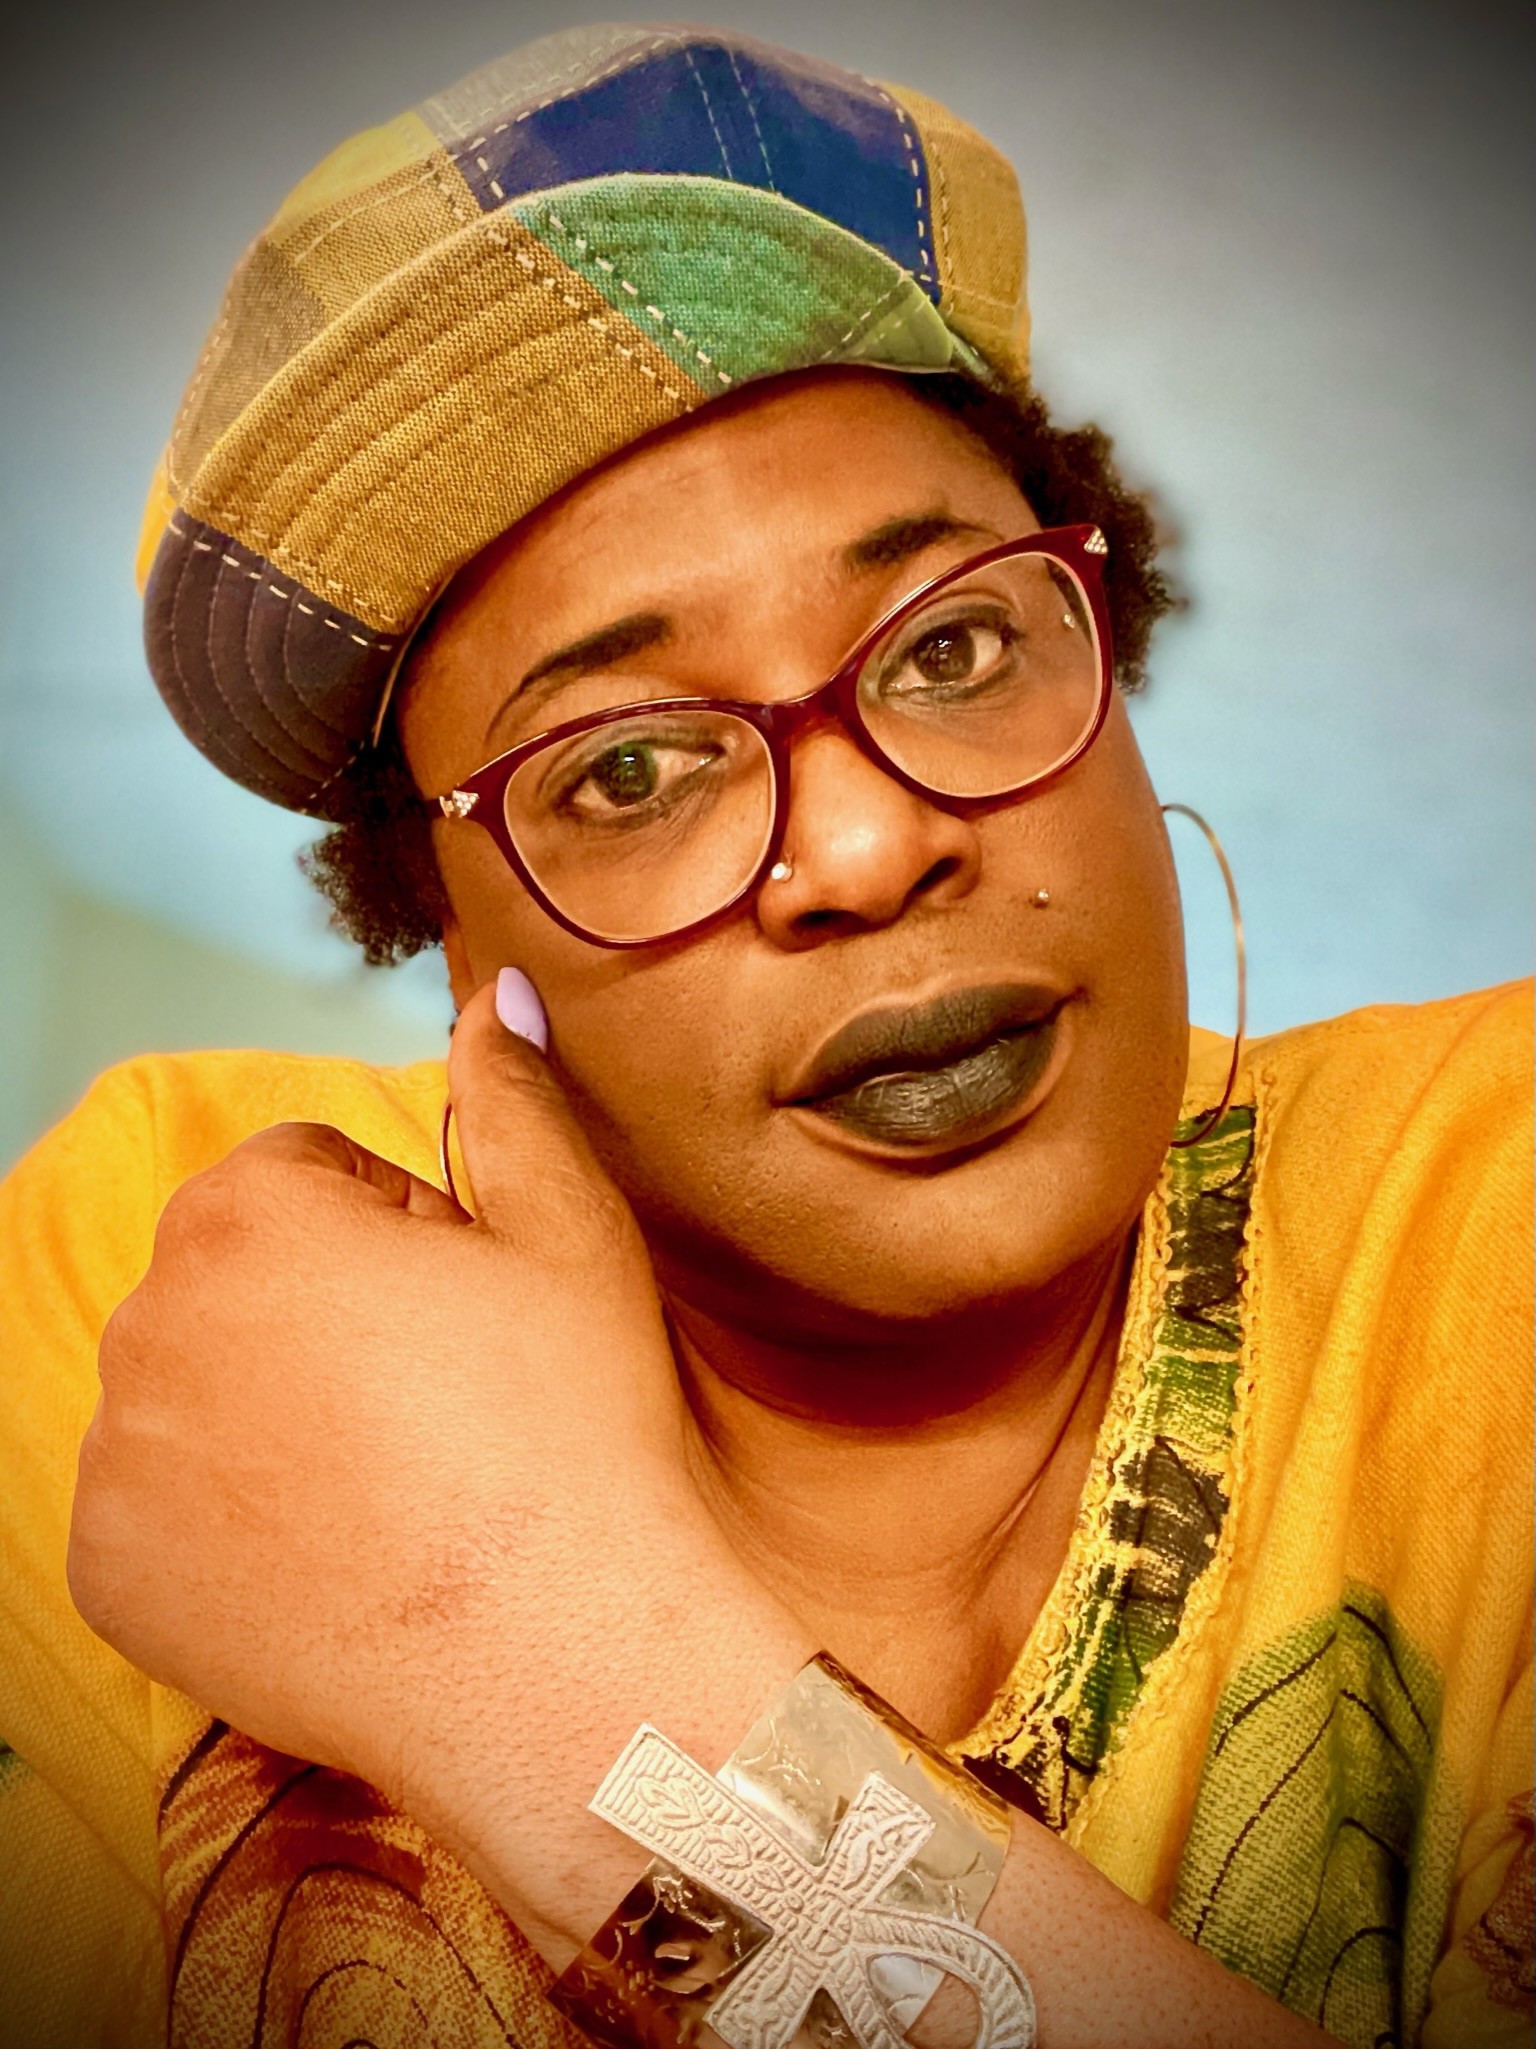 MoHagani squarely faces the camera in a tightly-cropped portrait-oriented photograph. The image is cropped from roughly mid-shoulder in and from mid-chest up. MoHagani is wearing a bright yellow shirt with an abstracted design that's mostly covered by her right arm with is raised with her hand in a fist up to her shoulder; the abstracted design on the shirt looks like foliage. There is a large ankh bracelet on her raised arm. She wears large enamel glasses, large hoop earrings, dark matte lipstick, and a newsboy cap in quilted squares of brown, yellow, green, and blue.